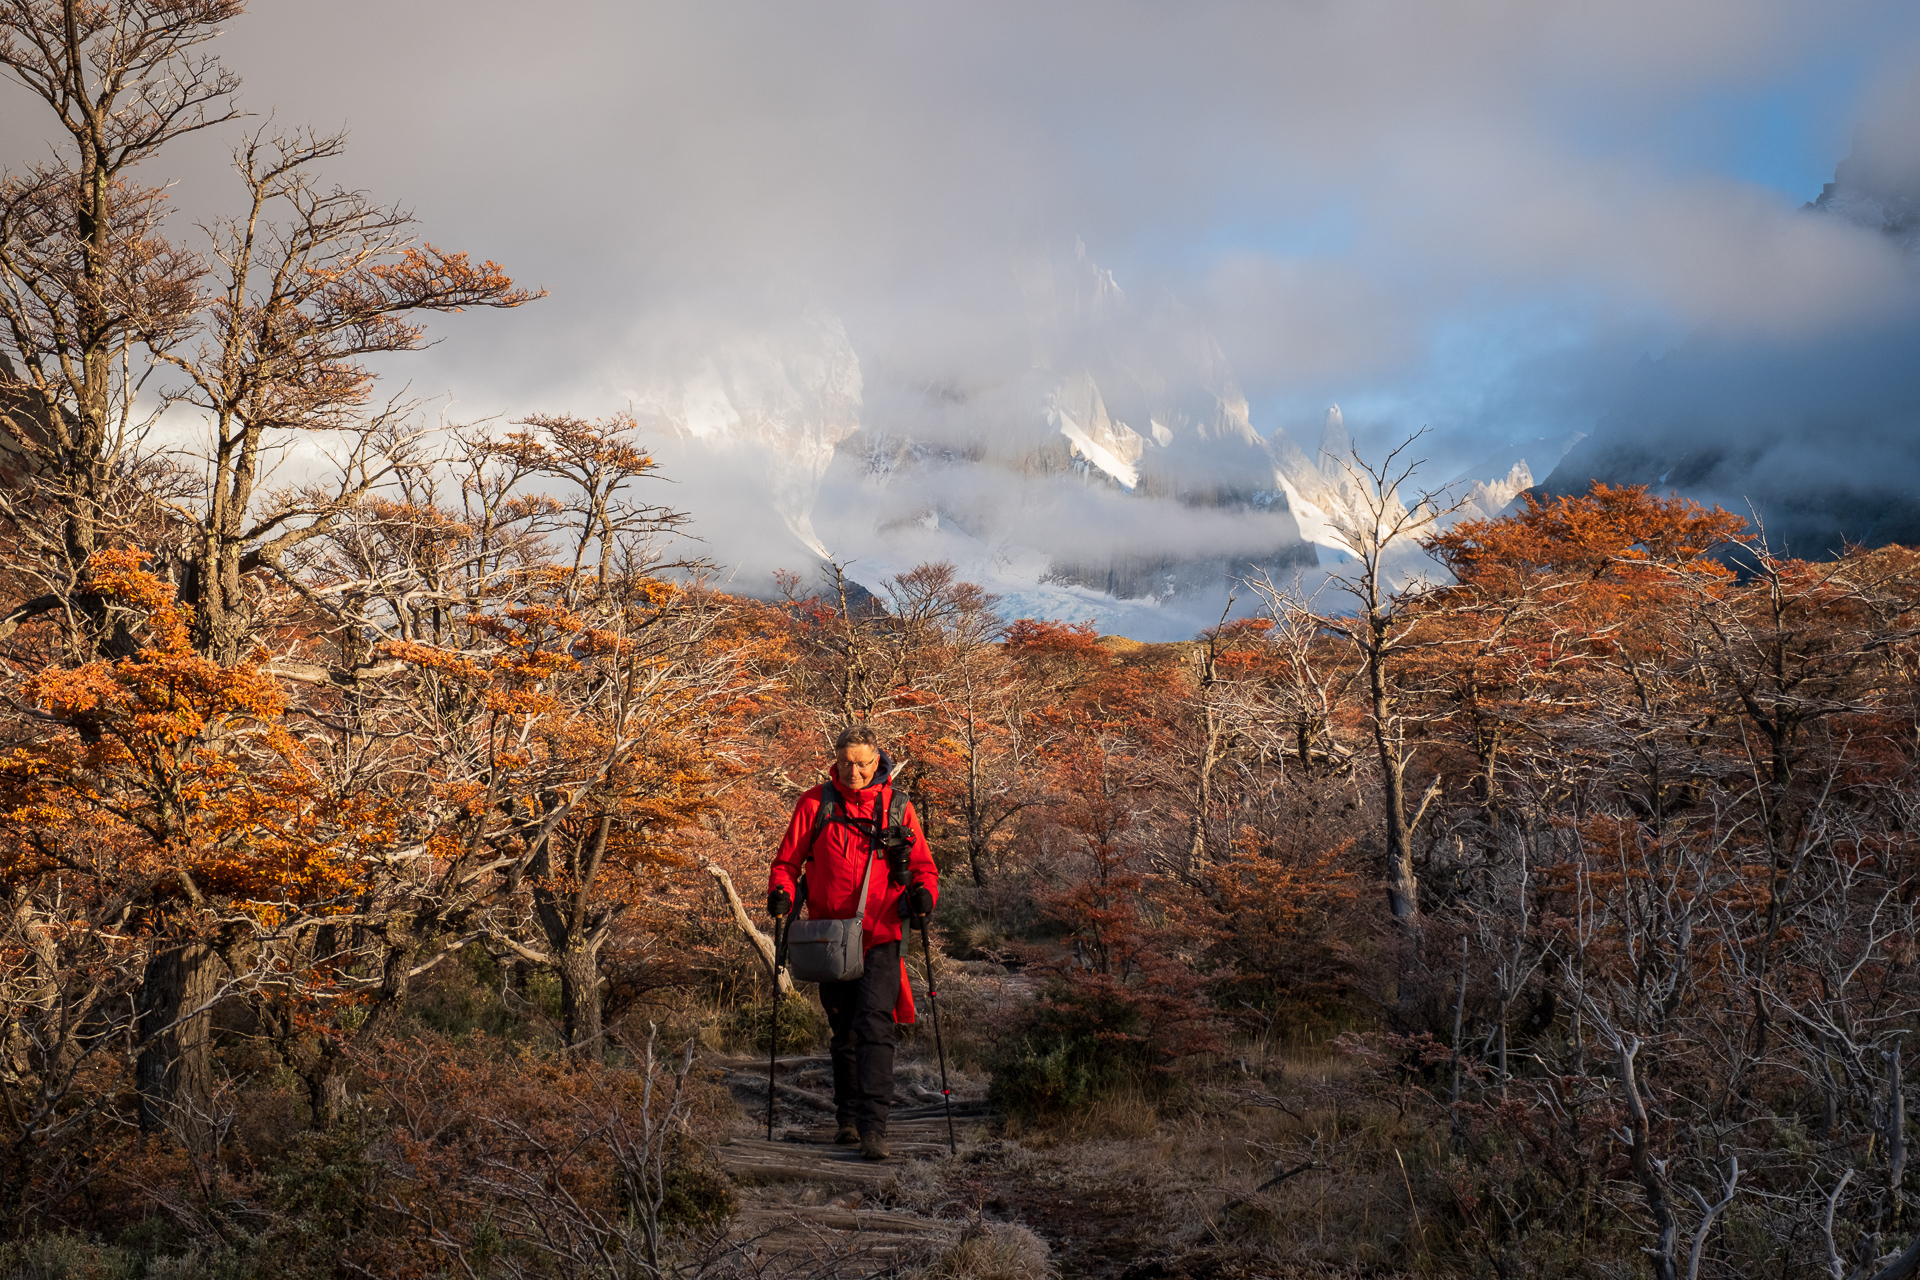 Trekking in front of Cerro Torre and fall foliage.